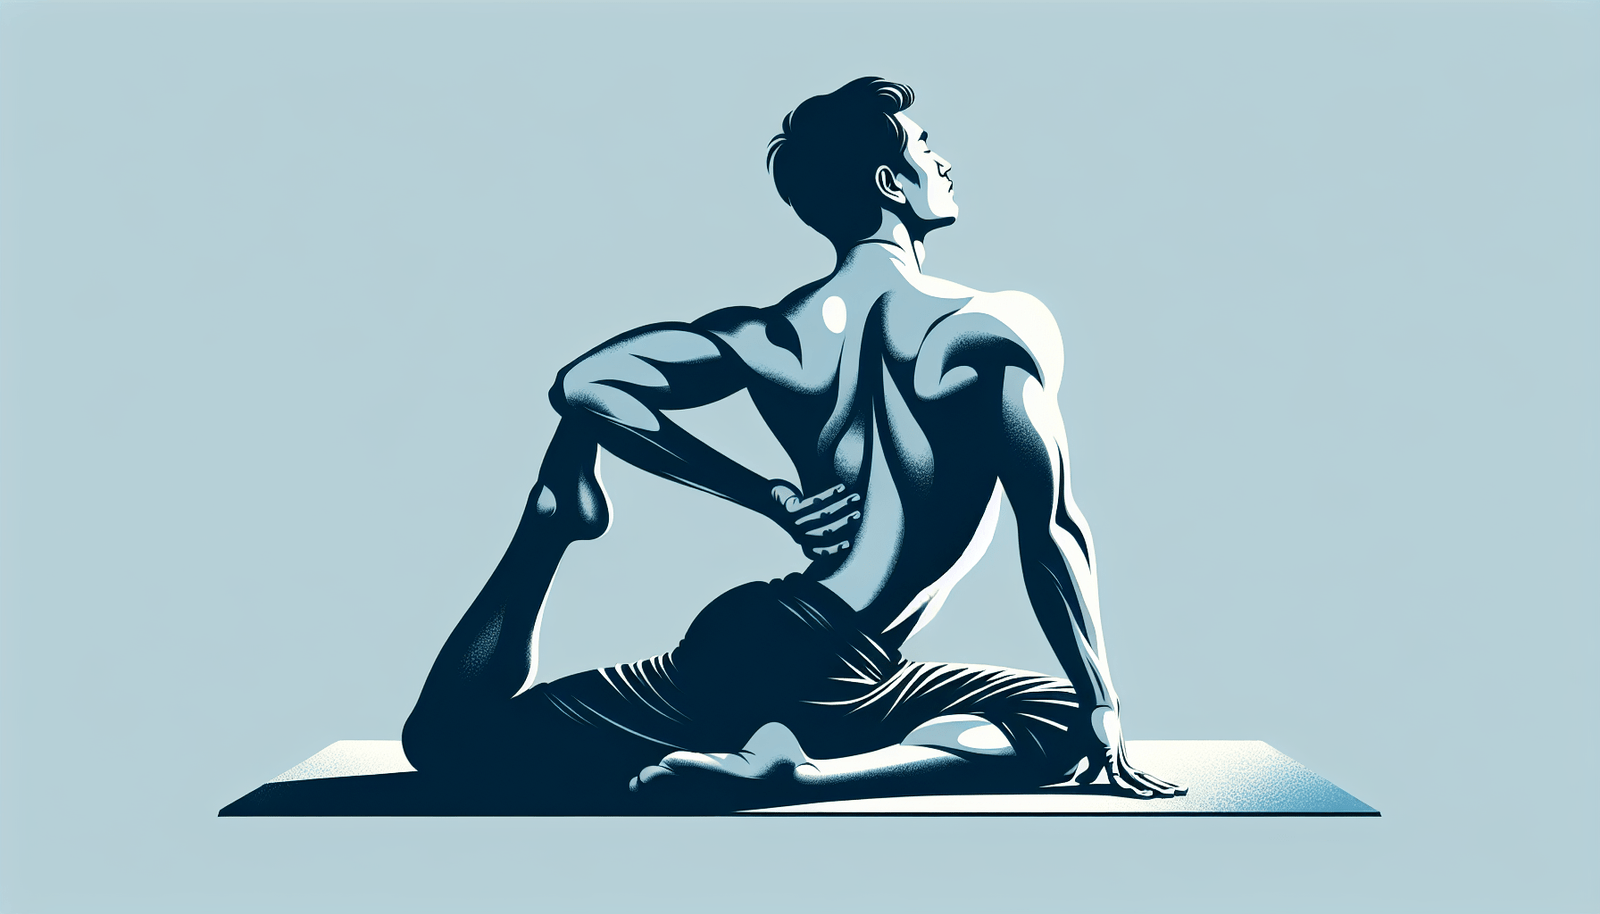 Are There Yoga Workouts That Focus On The Back And Spine?